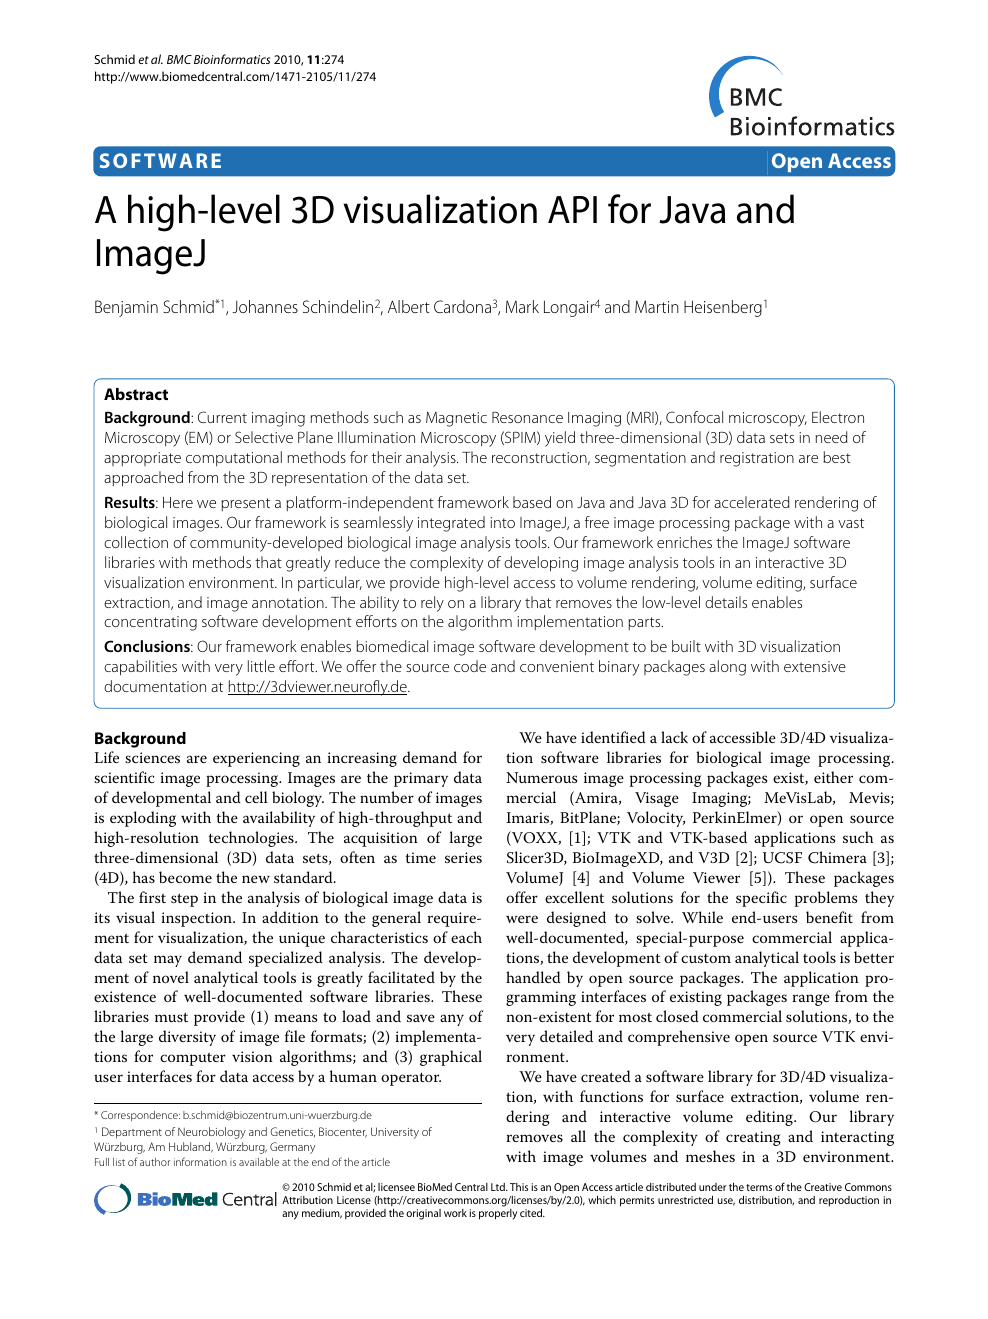 A High Level 3d Visualization Api For Java And Imagej